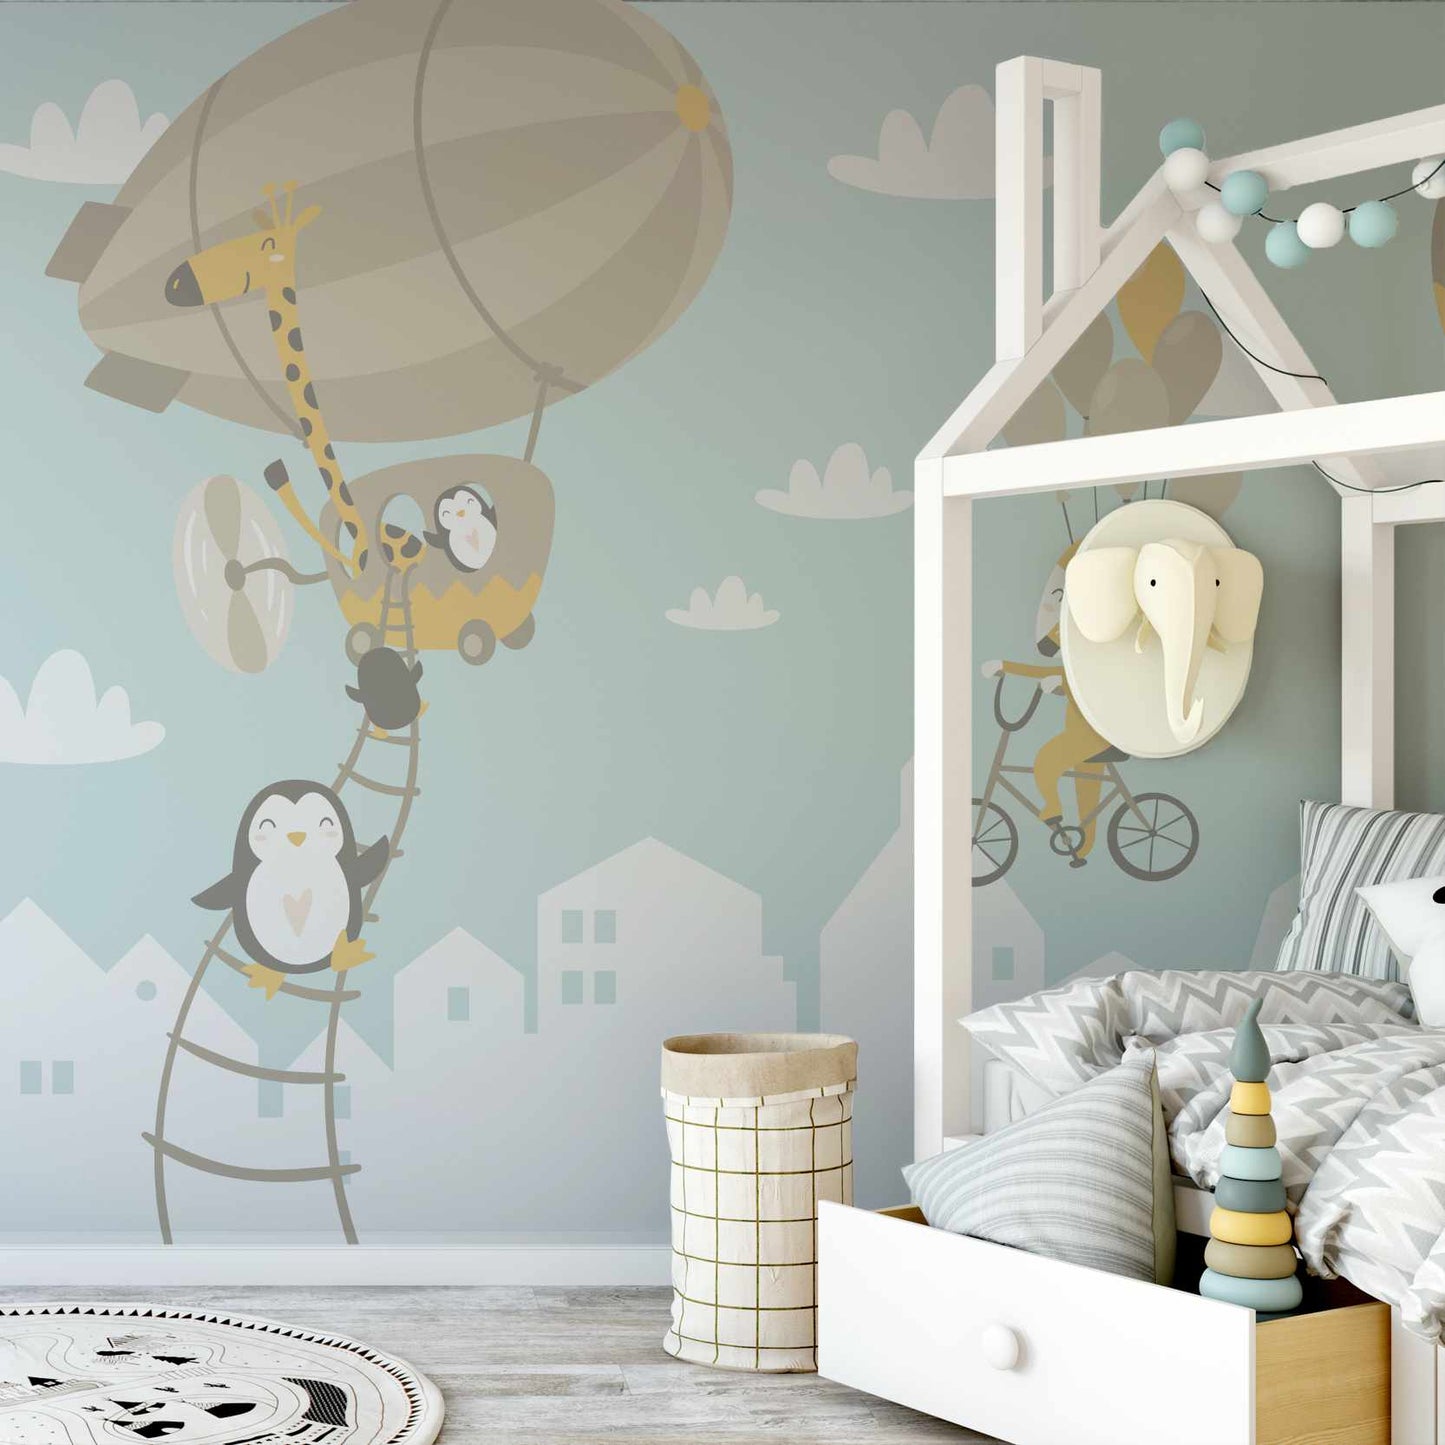 Aquaked wallpaper mural in a childs bedroom | WallpaperMural.com